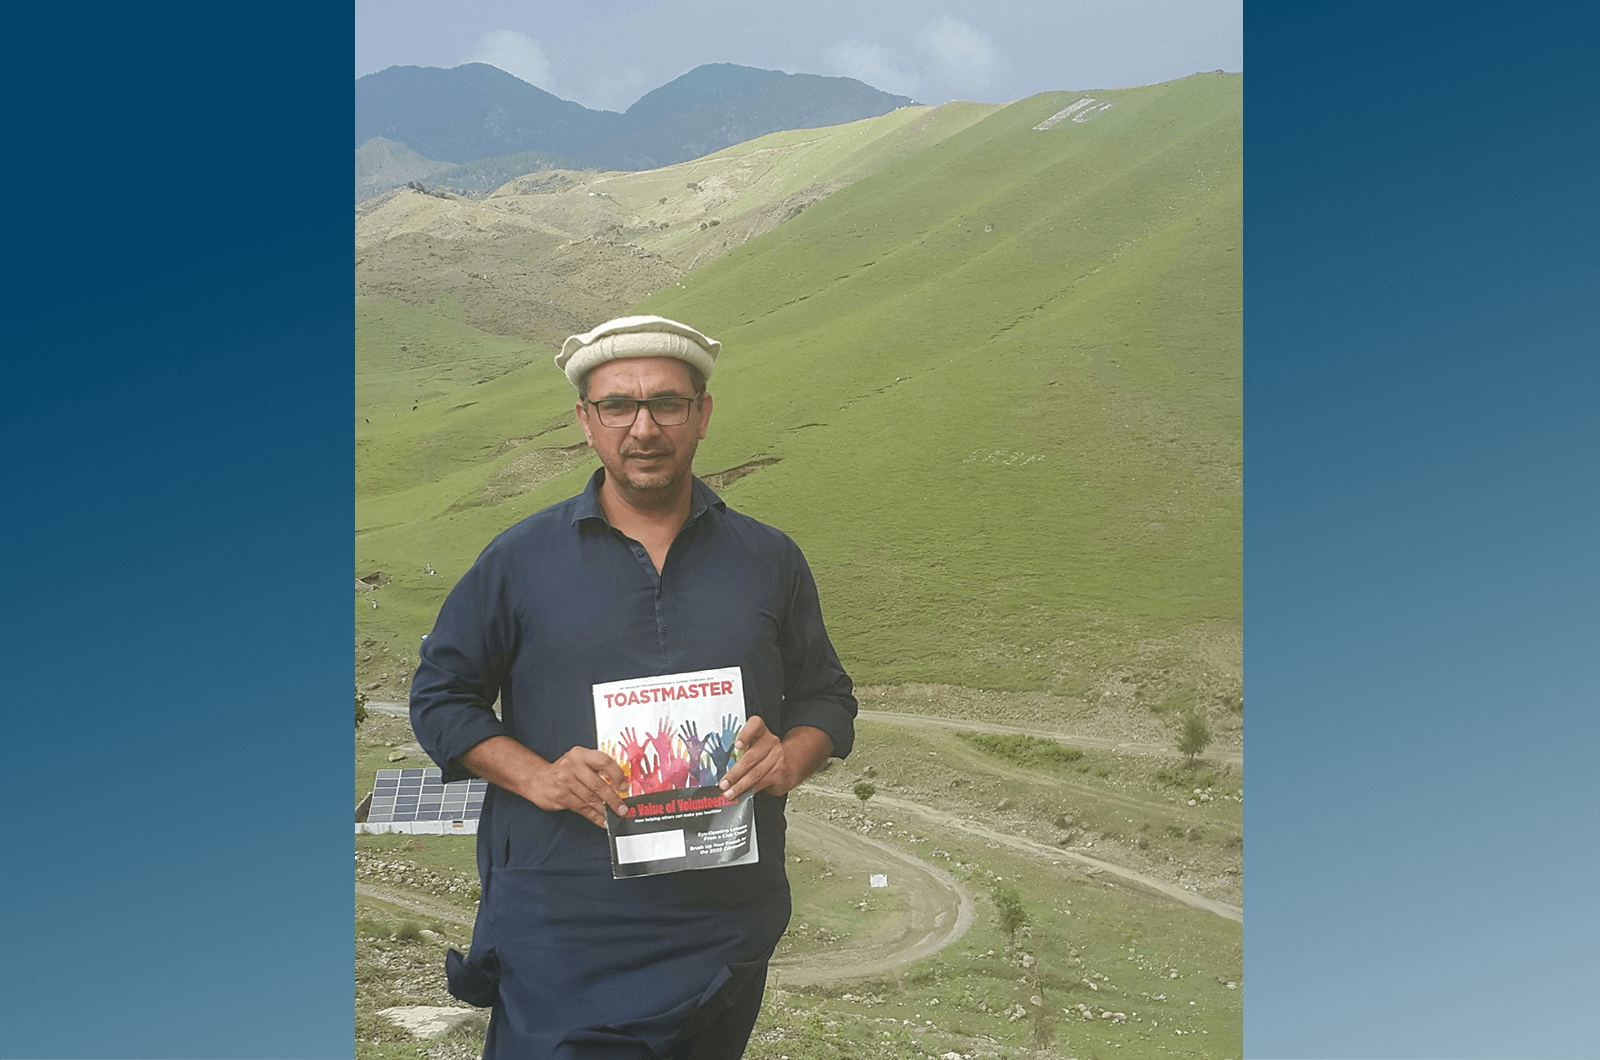 Noor Khan of Lahore, Pakistan, visits his hometown, South Waziristan, Pakistan, where he hopes to charter a new Toastmasters club.